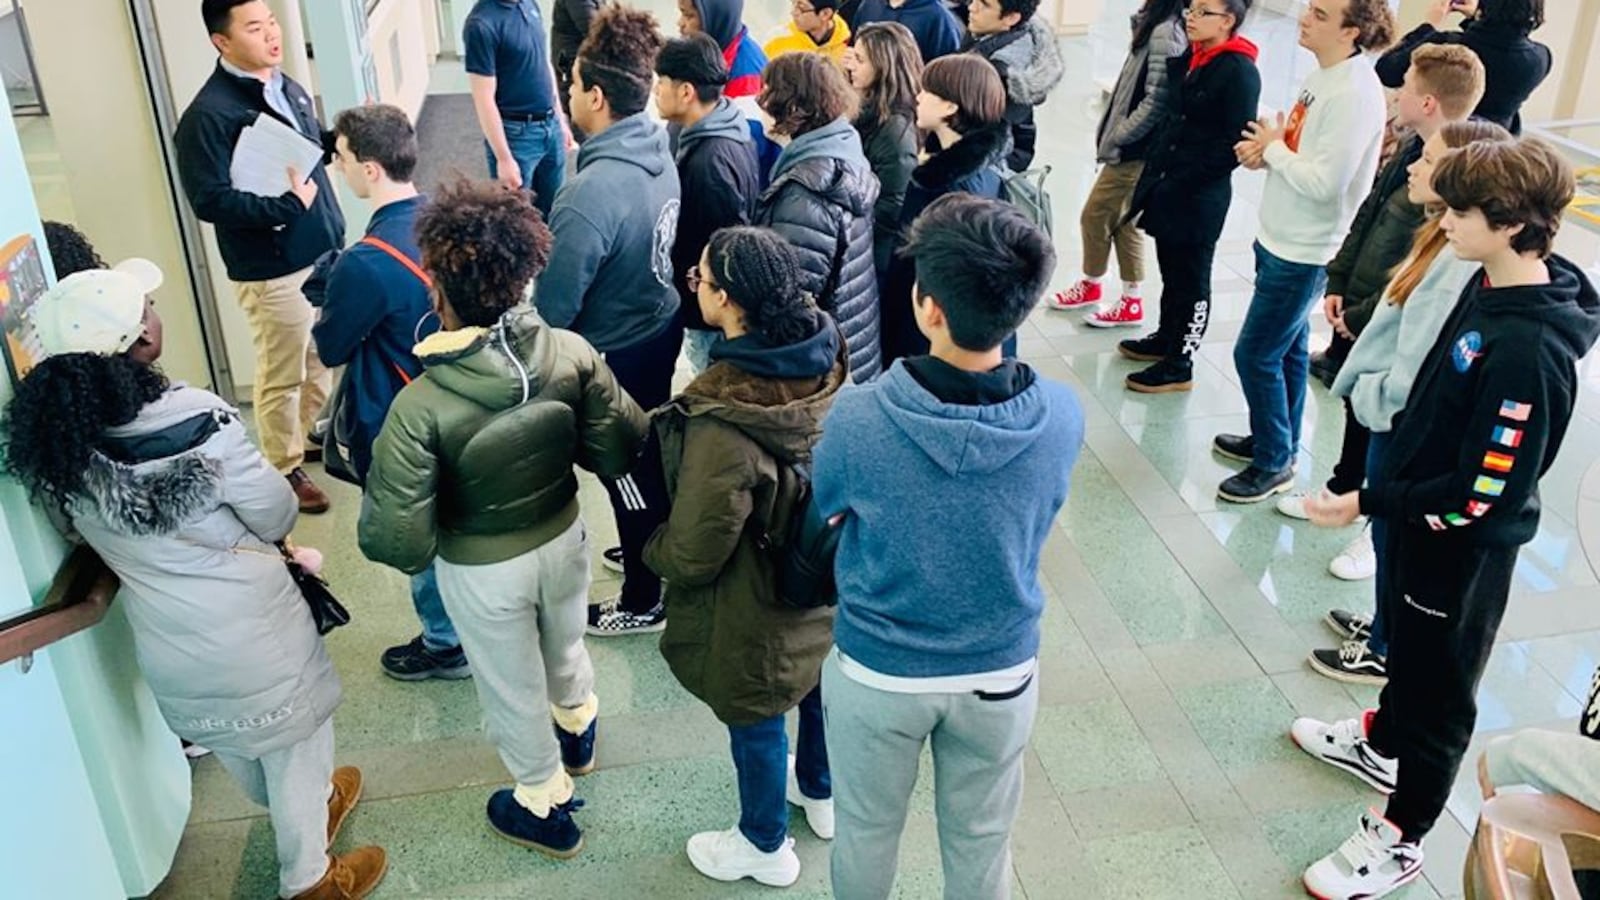 Columbia Secondary School students go on a college tour. Parents in Harlem want the school to overhaul its admissions standards to be more inclusive of the surrounding community.